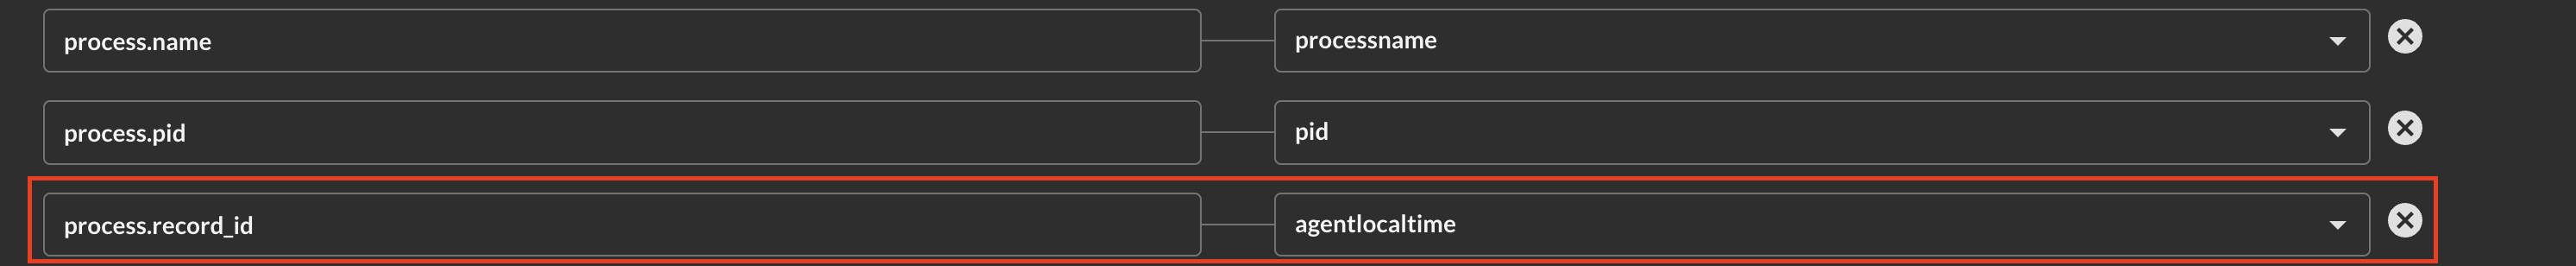 FIG. 10 - Mapping a nested object's `record_id`, such as `process.record_id`